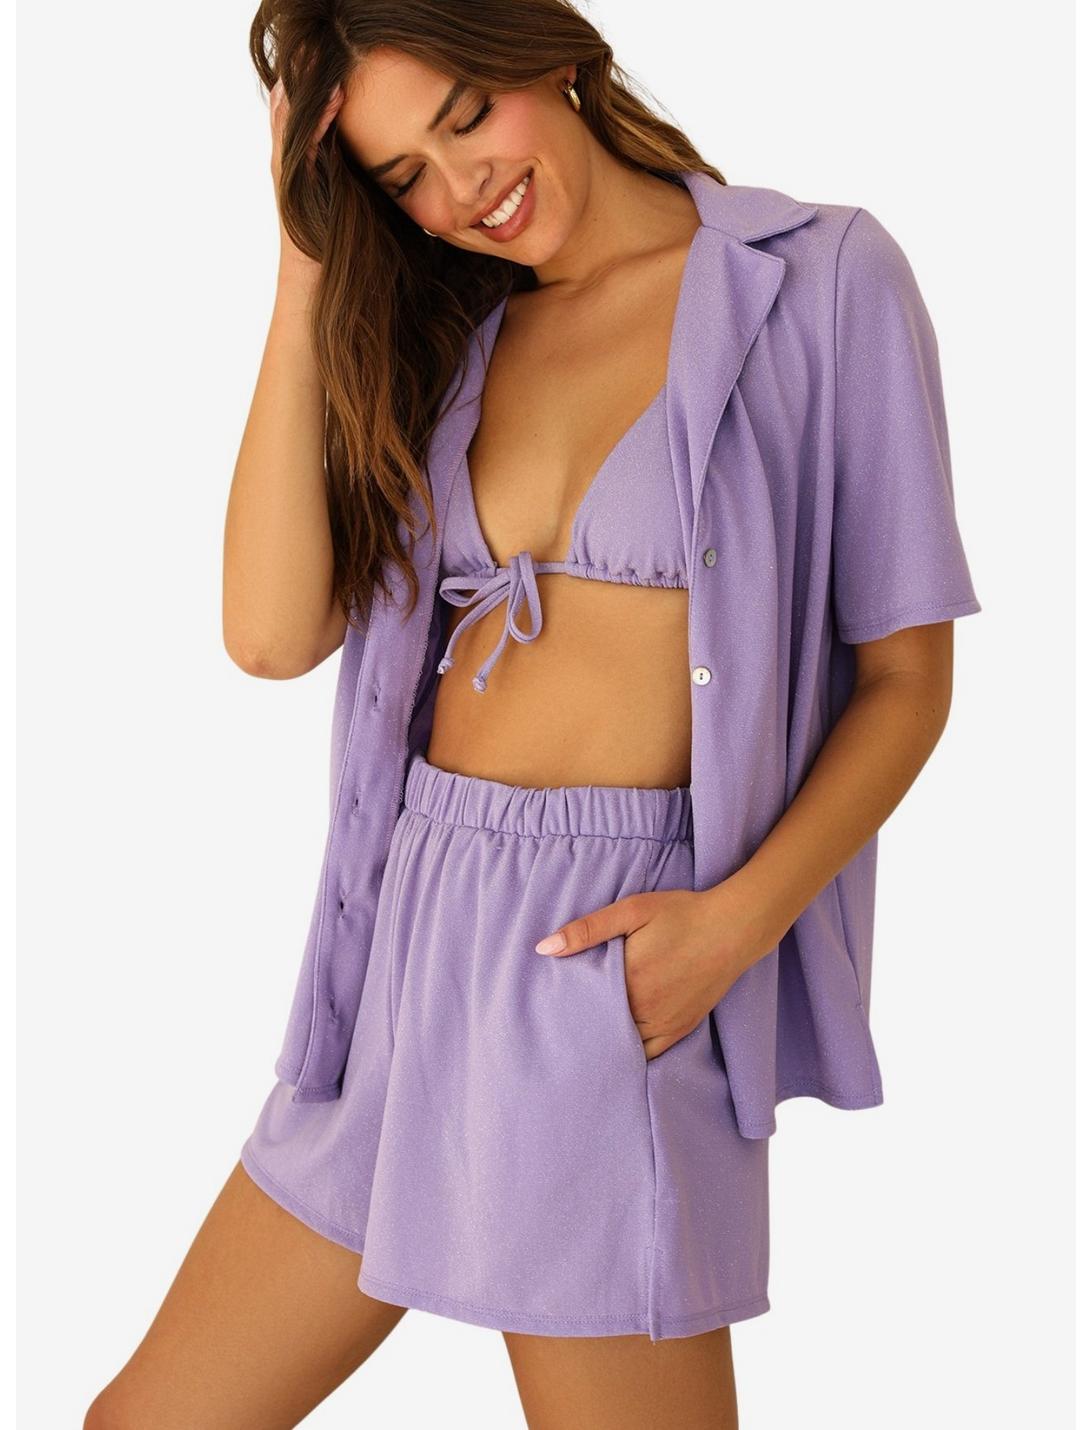 Dippin' Daisy's Ashley Shorts Cover-Up Bedazzled Lilac, PURPLE, hi-res